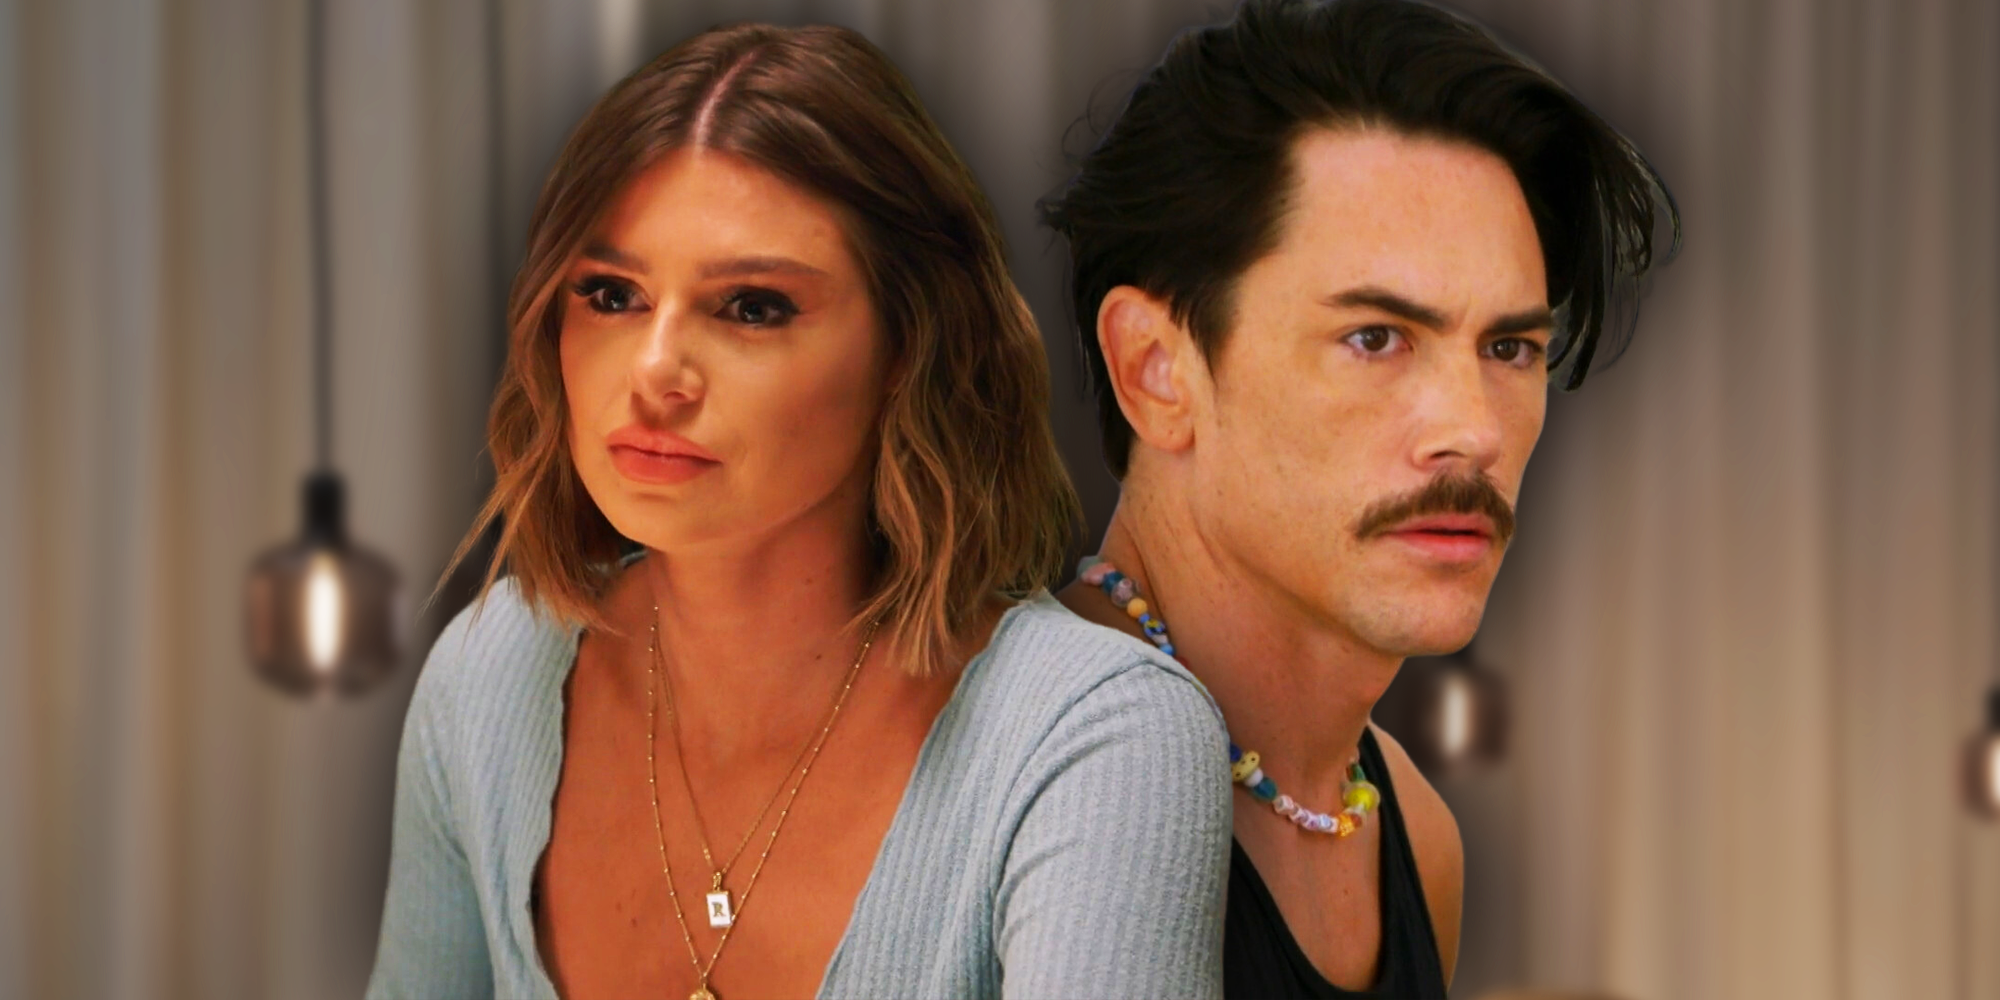 Vanderpump Rules' Raquel Leviss and Tom Sandoval looking away from each other